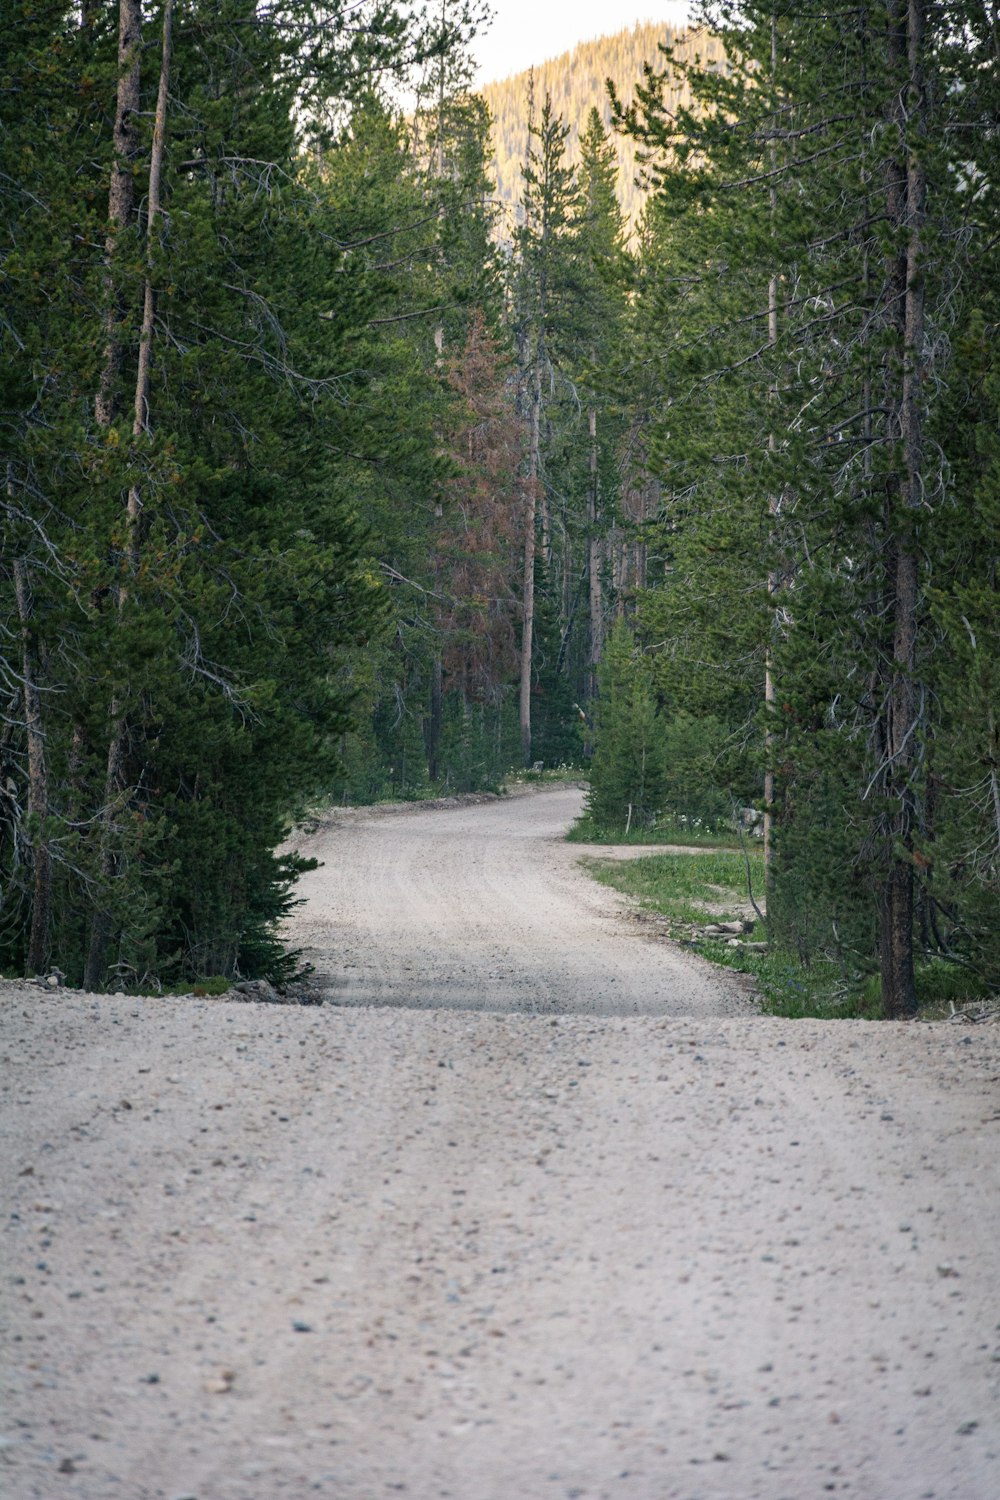 a bear walking down a dirt road in the woods